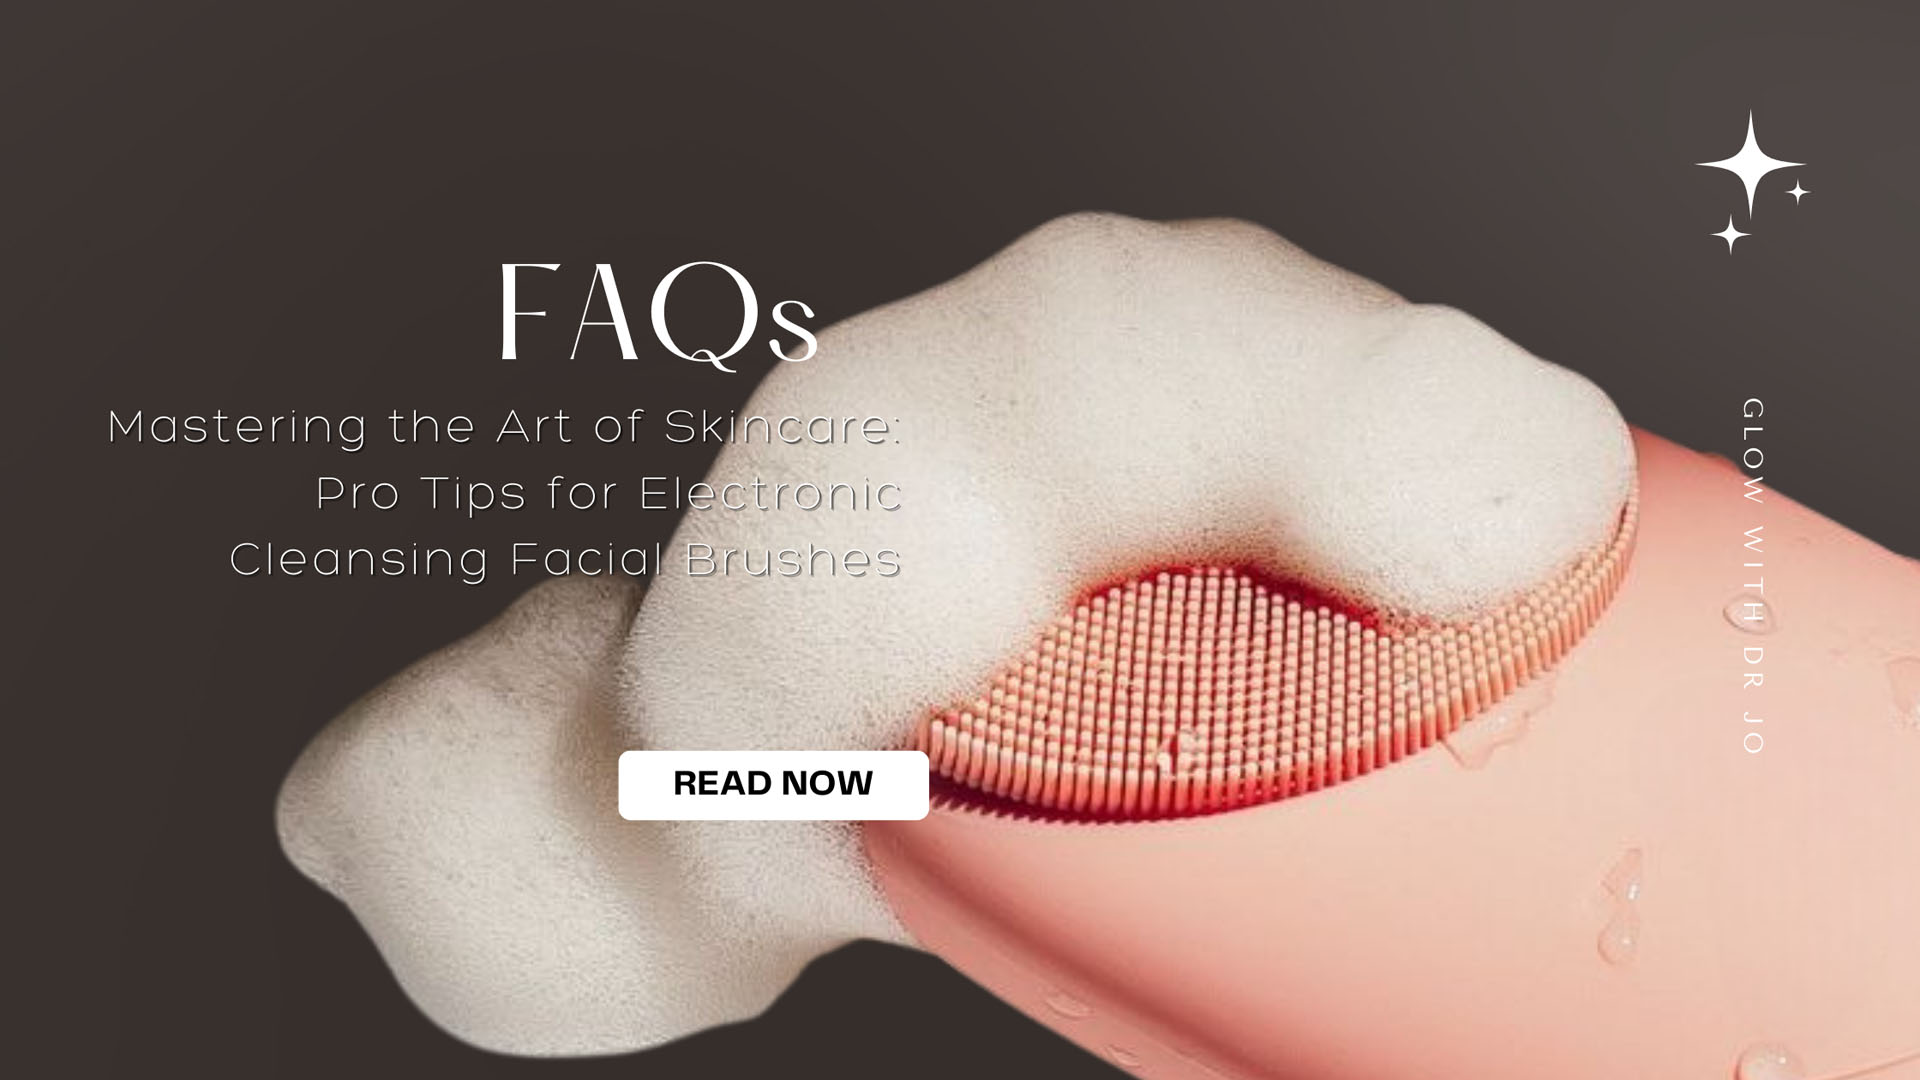 Mastering the Art of Skincare: Pro Tips for Electronic Cleansing Facial Brushes